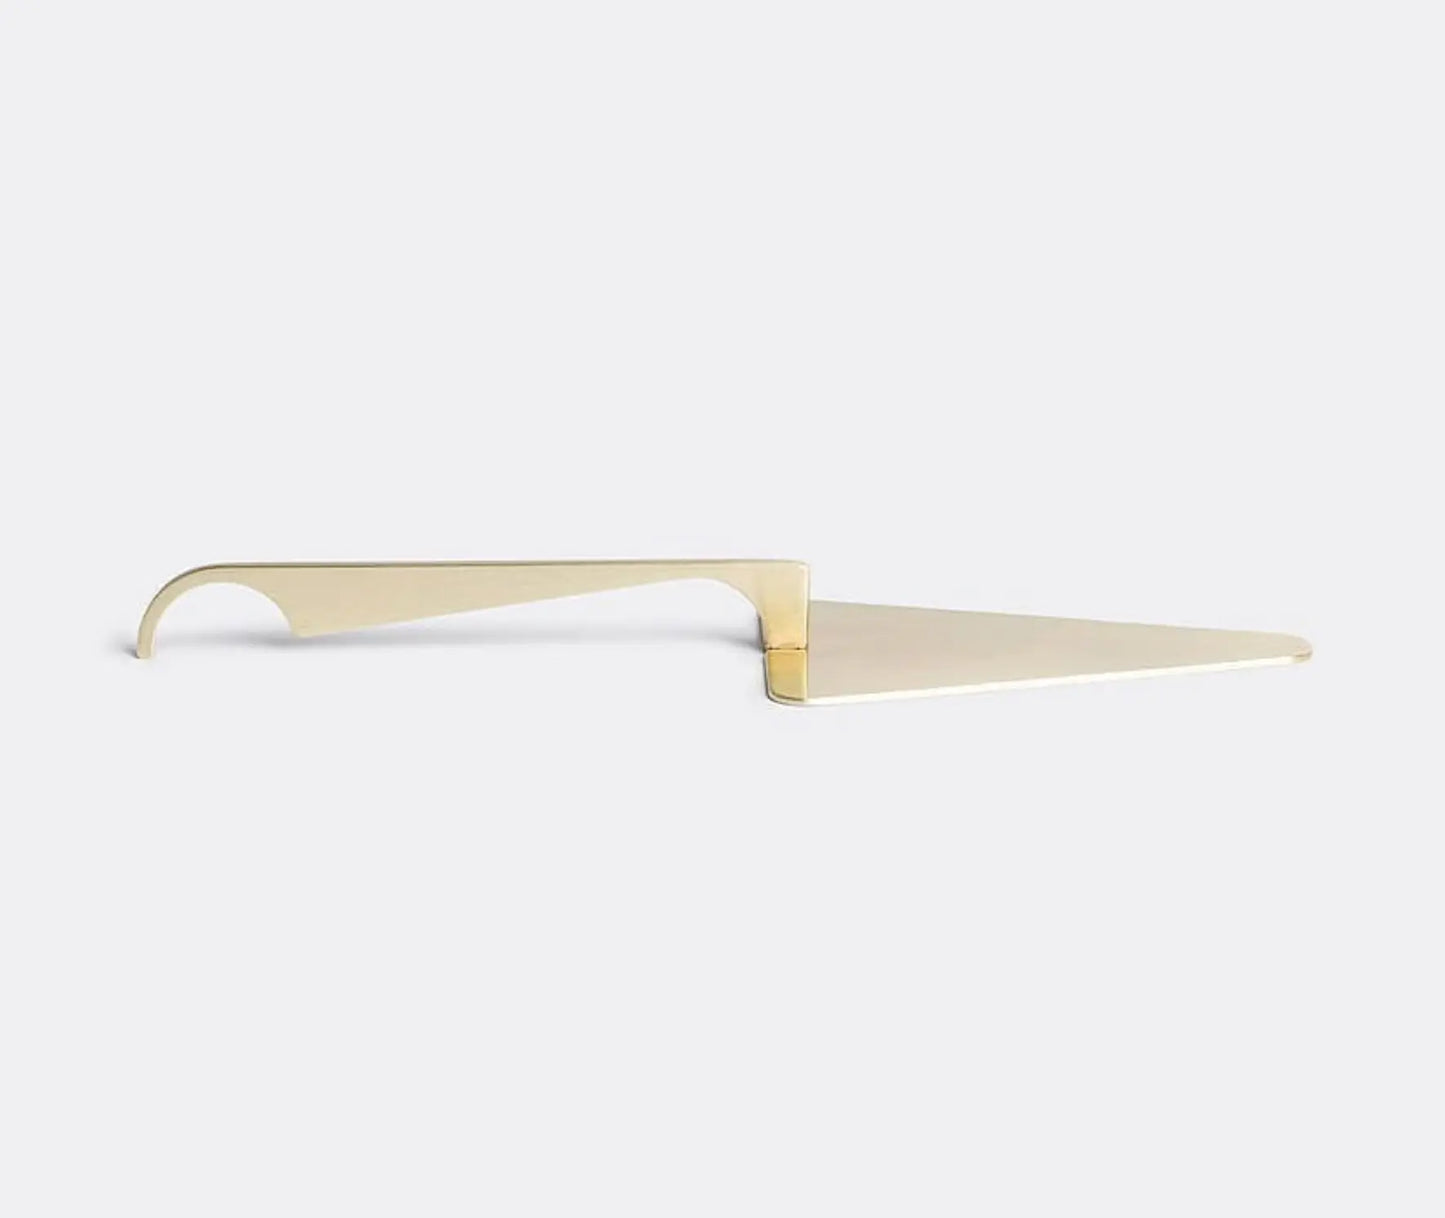 Cake Server | Sustainable Home Grace Souky